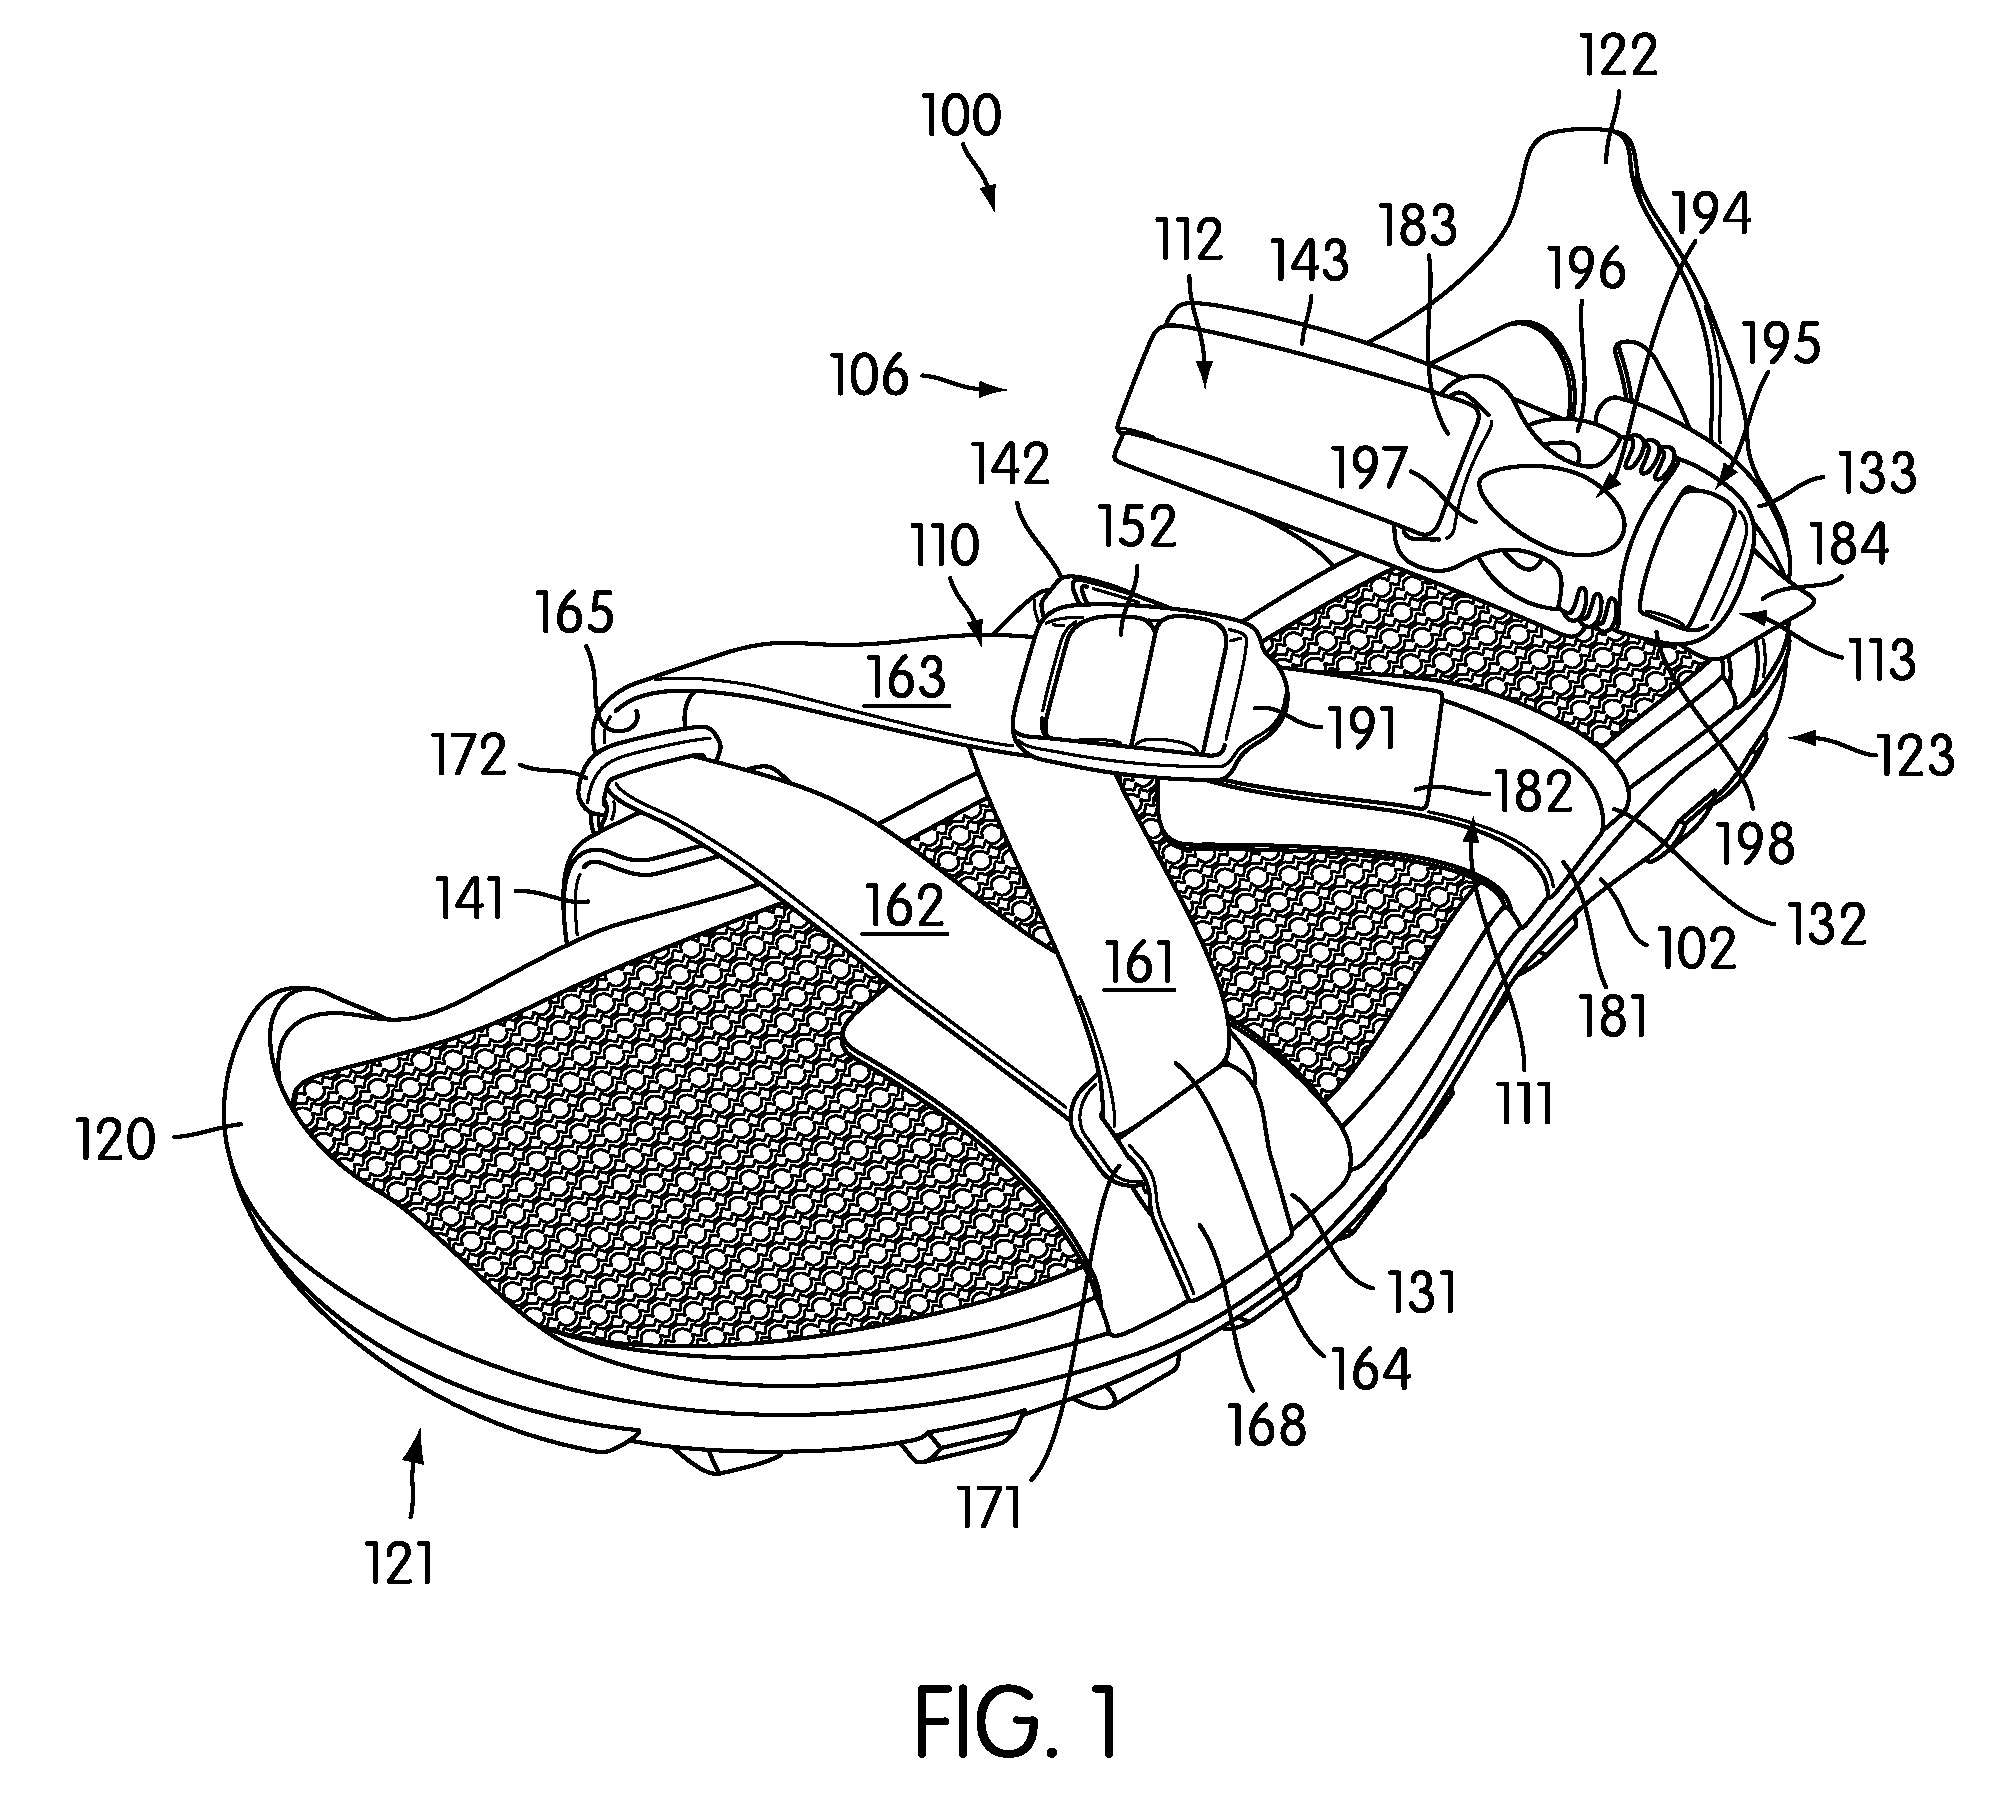 Article of footwear with mesh on outsole and insert